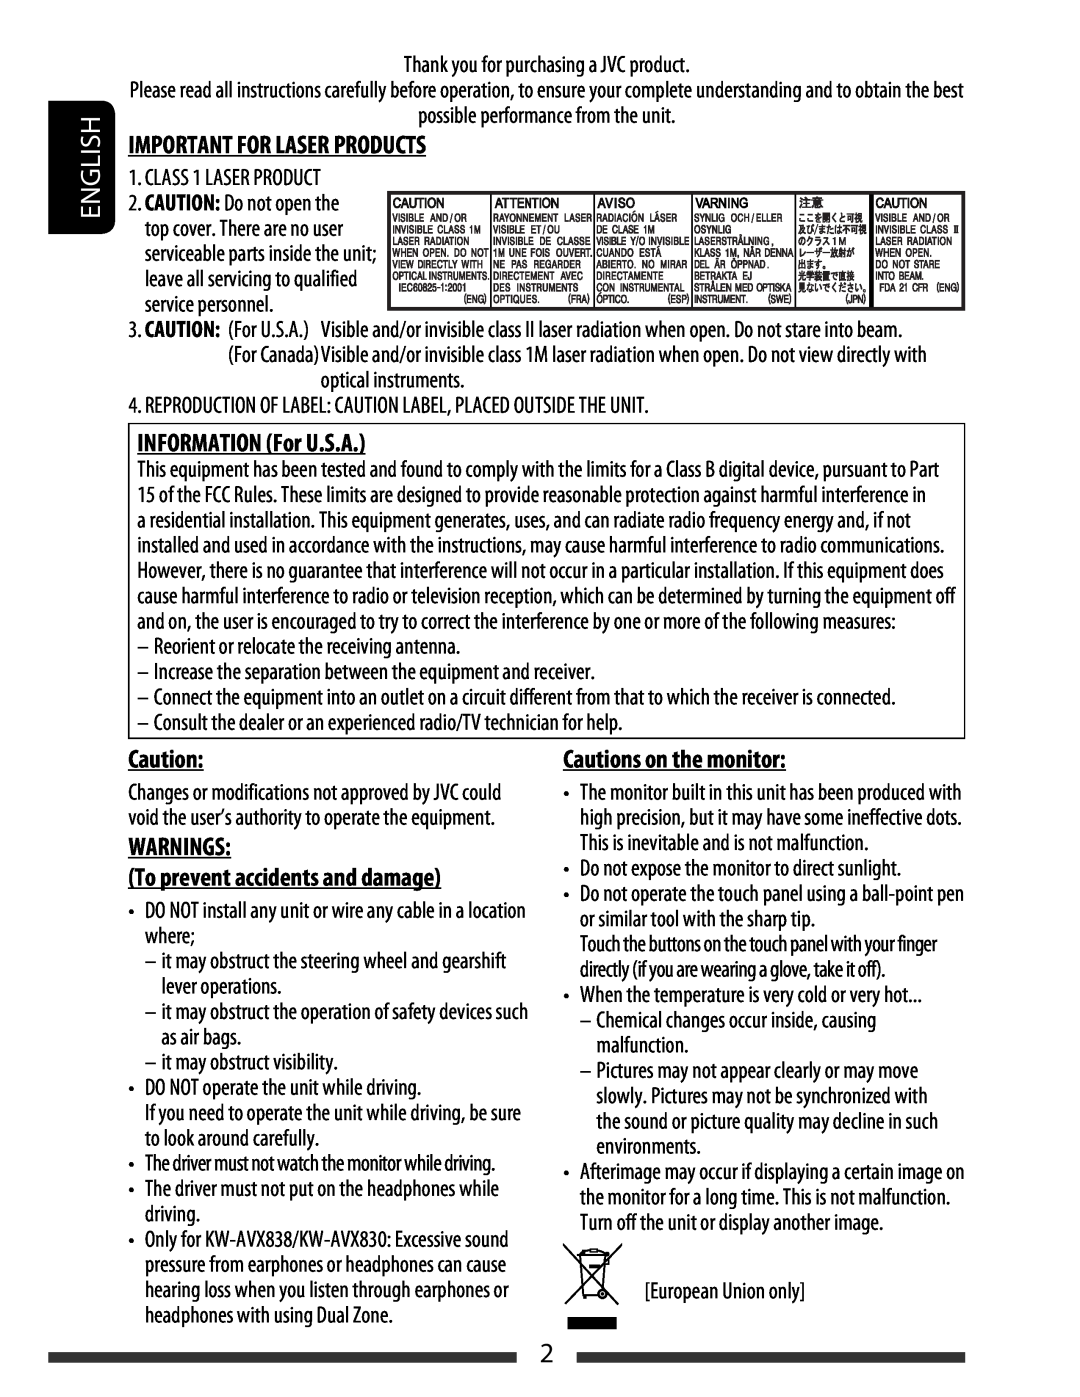 JVC KW-AVX838 manual English, Important For Laser Products, INFORMATION For U.S.A, WARNINGS To prevent accidents and damage 